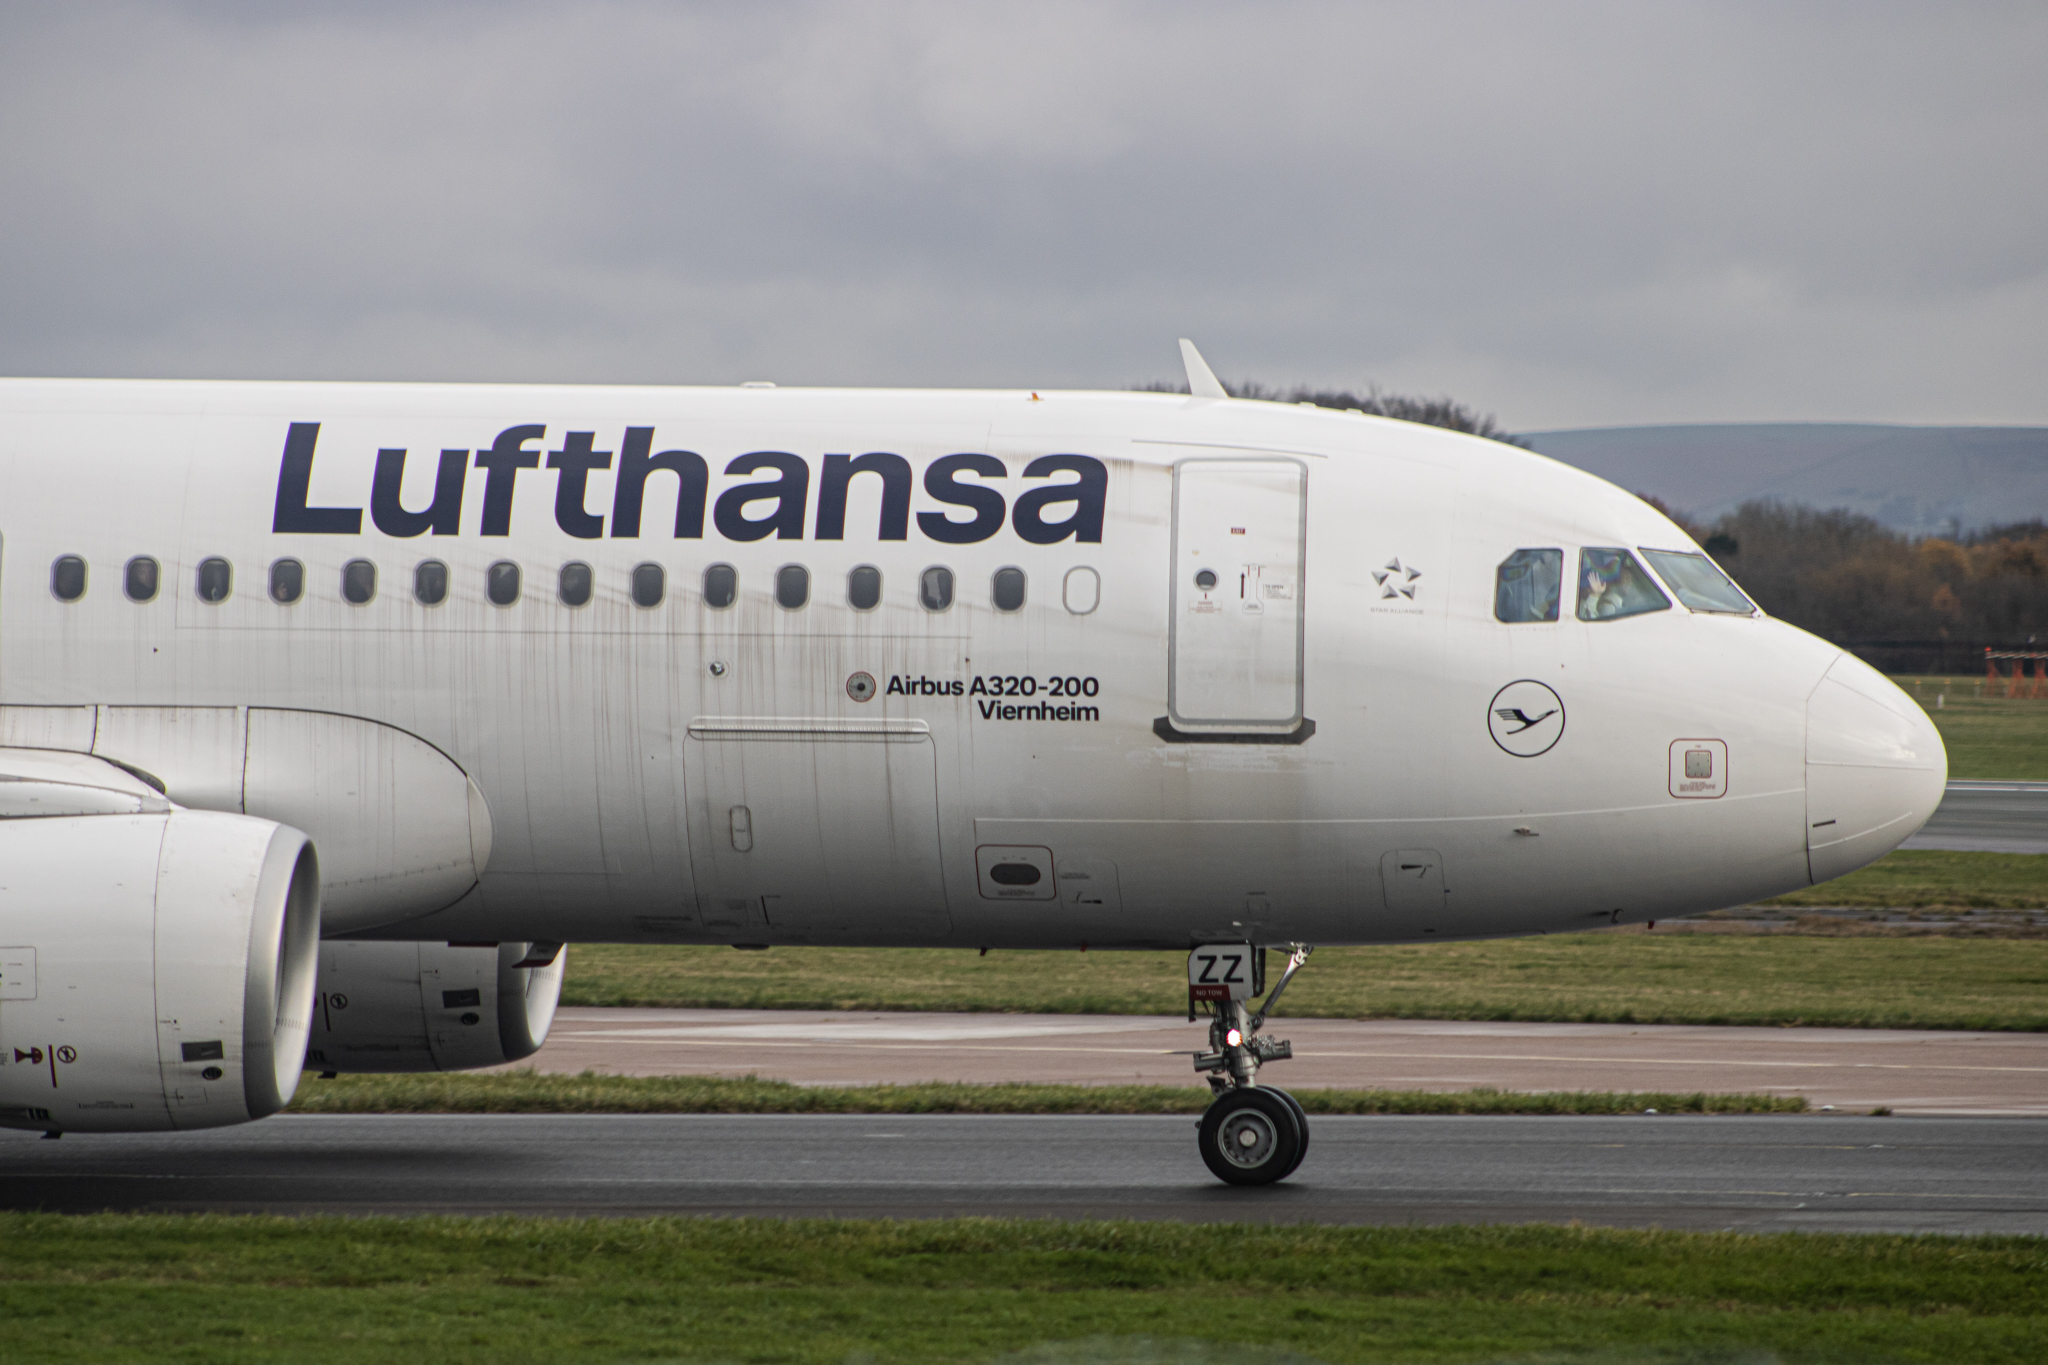 Lufthansa are applying more SAF practices to sustainability.